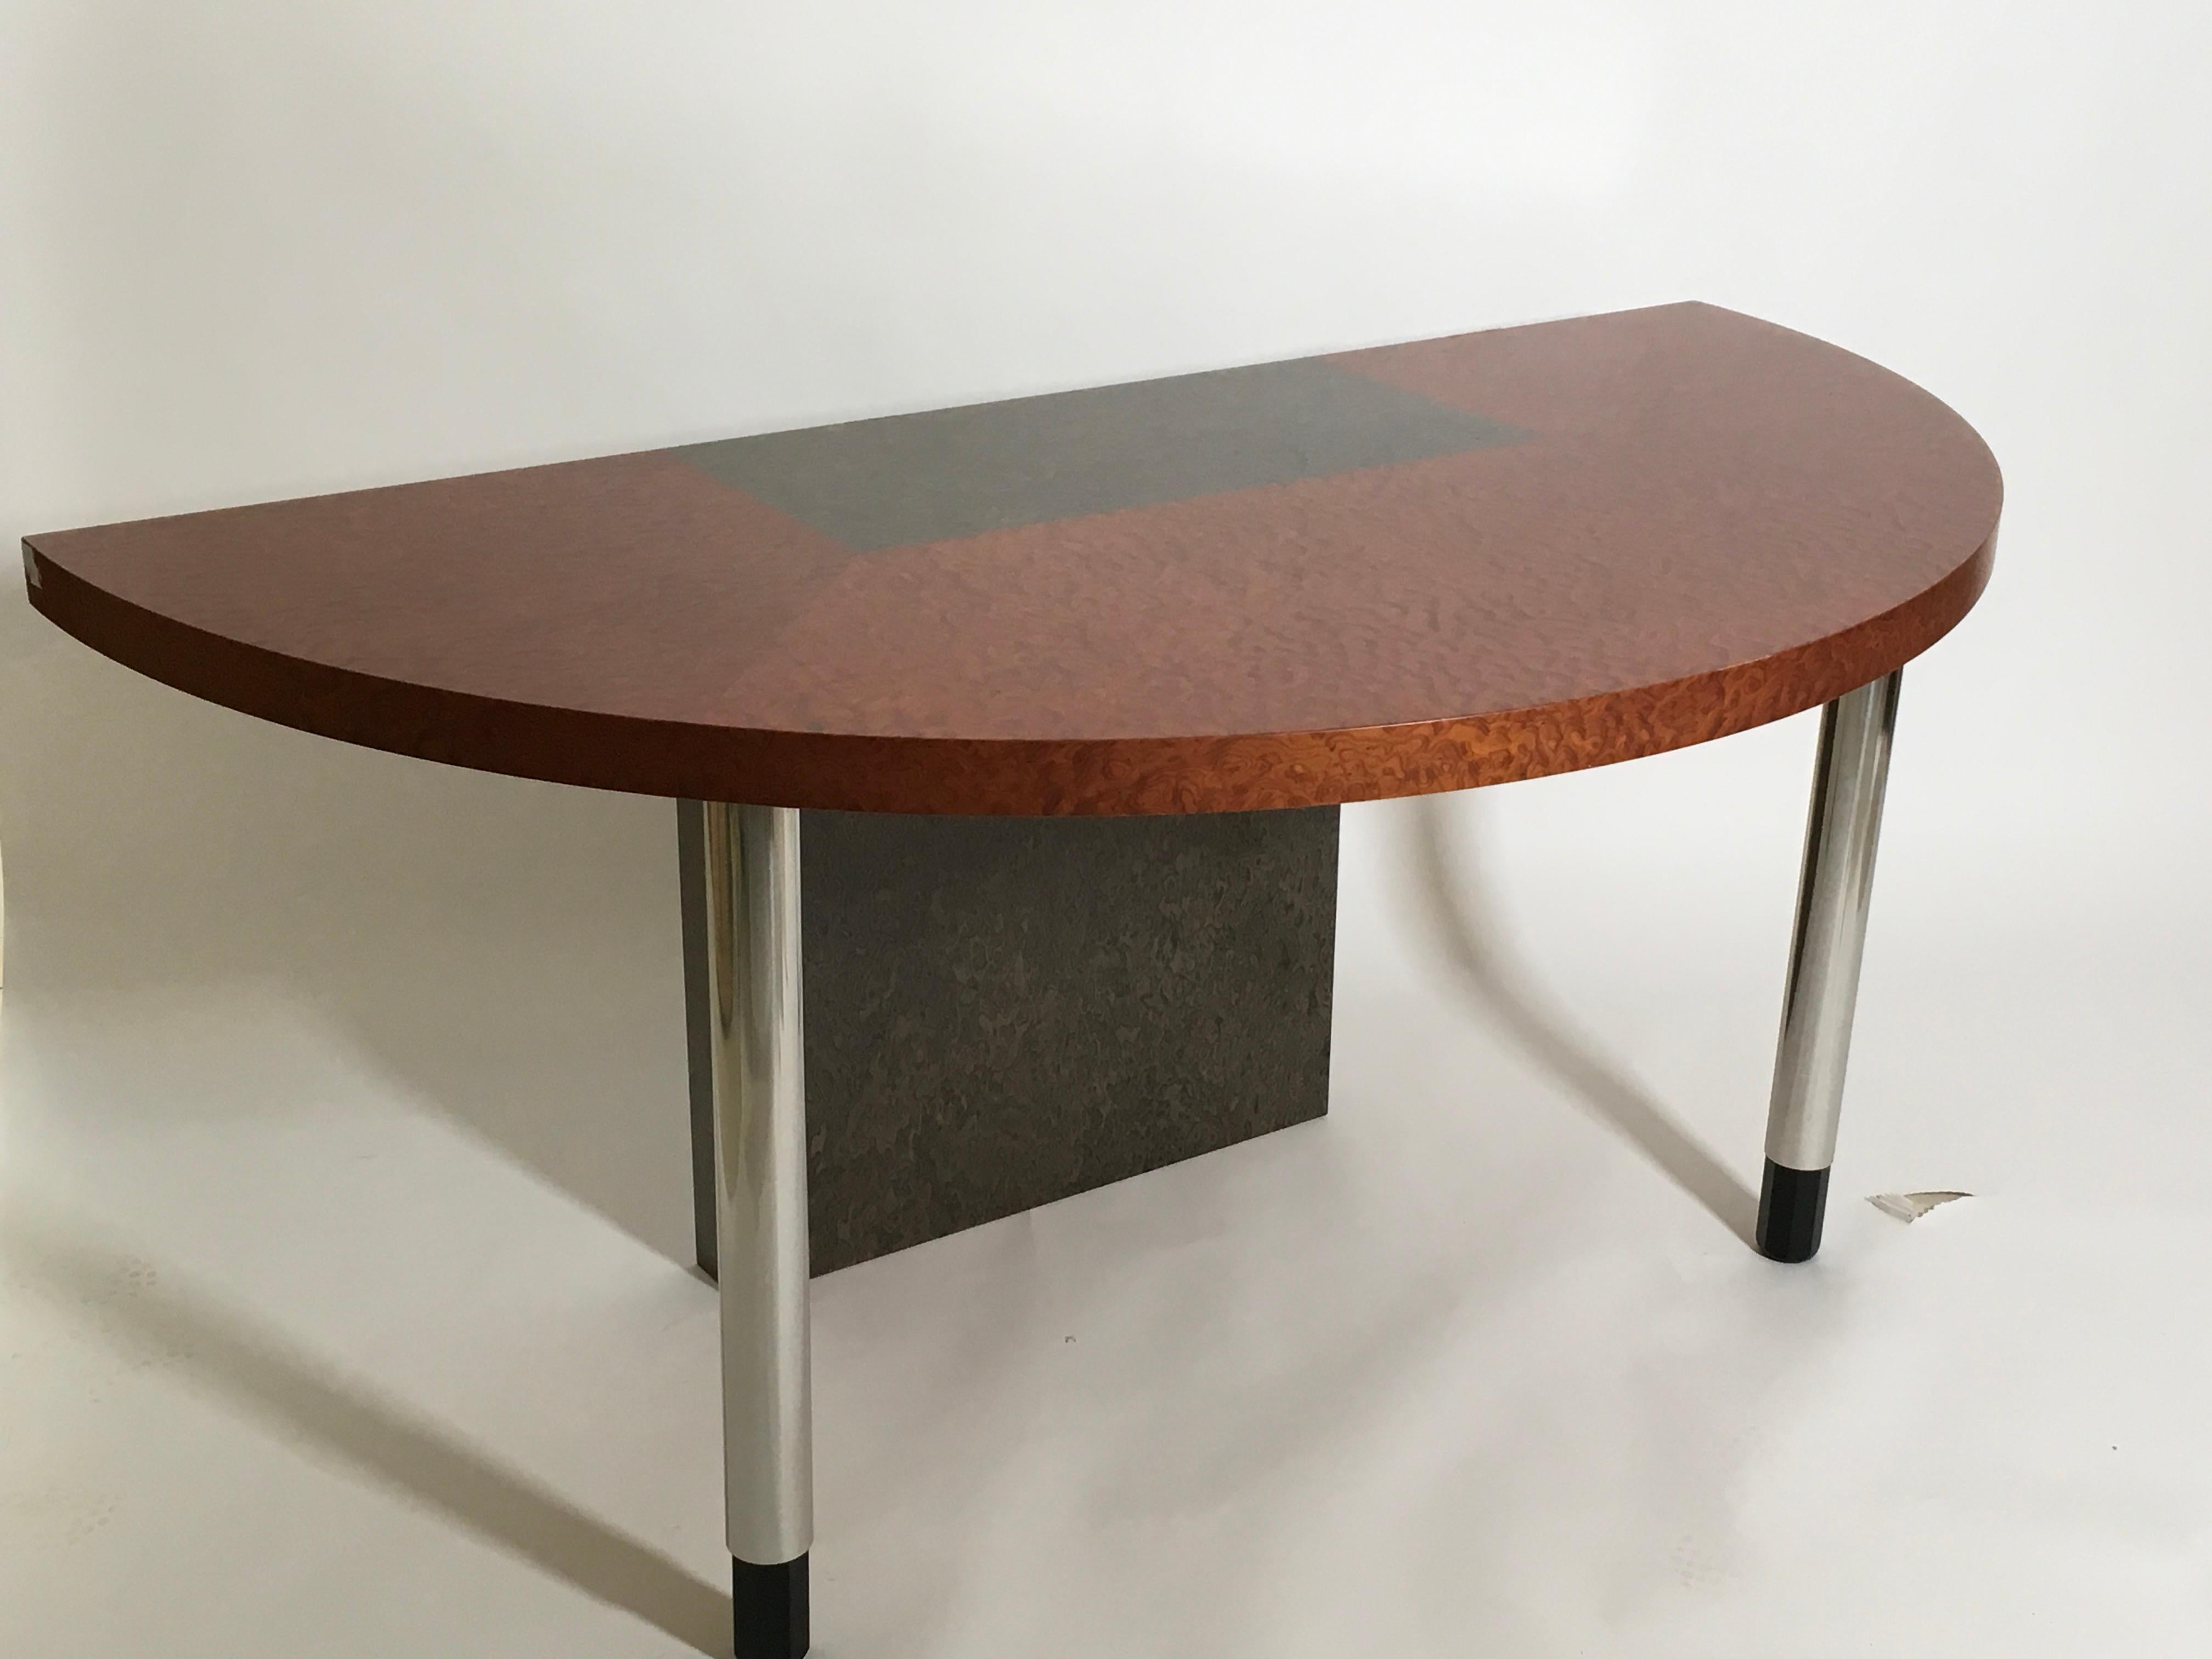 Ettore Sottsass half moon console for Zanotta, made in Italy, 1980s. Brown and gray. Wood with briar and steel top. Vintage, very good condition.